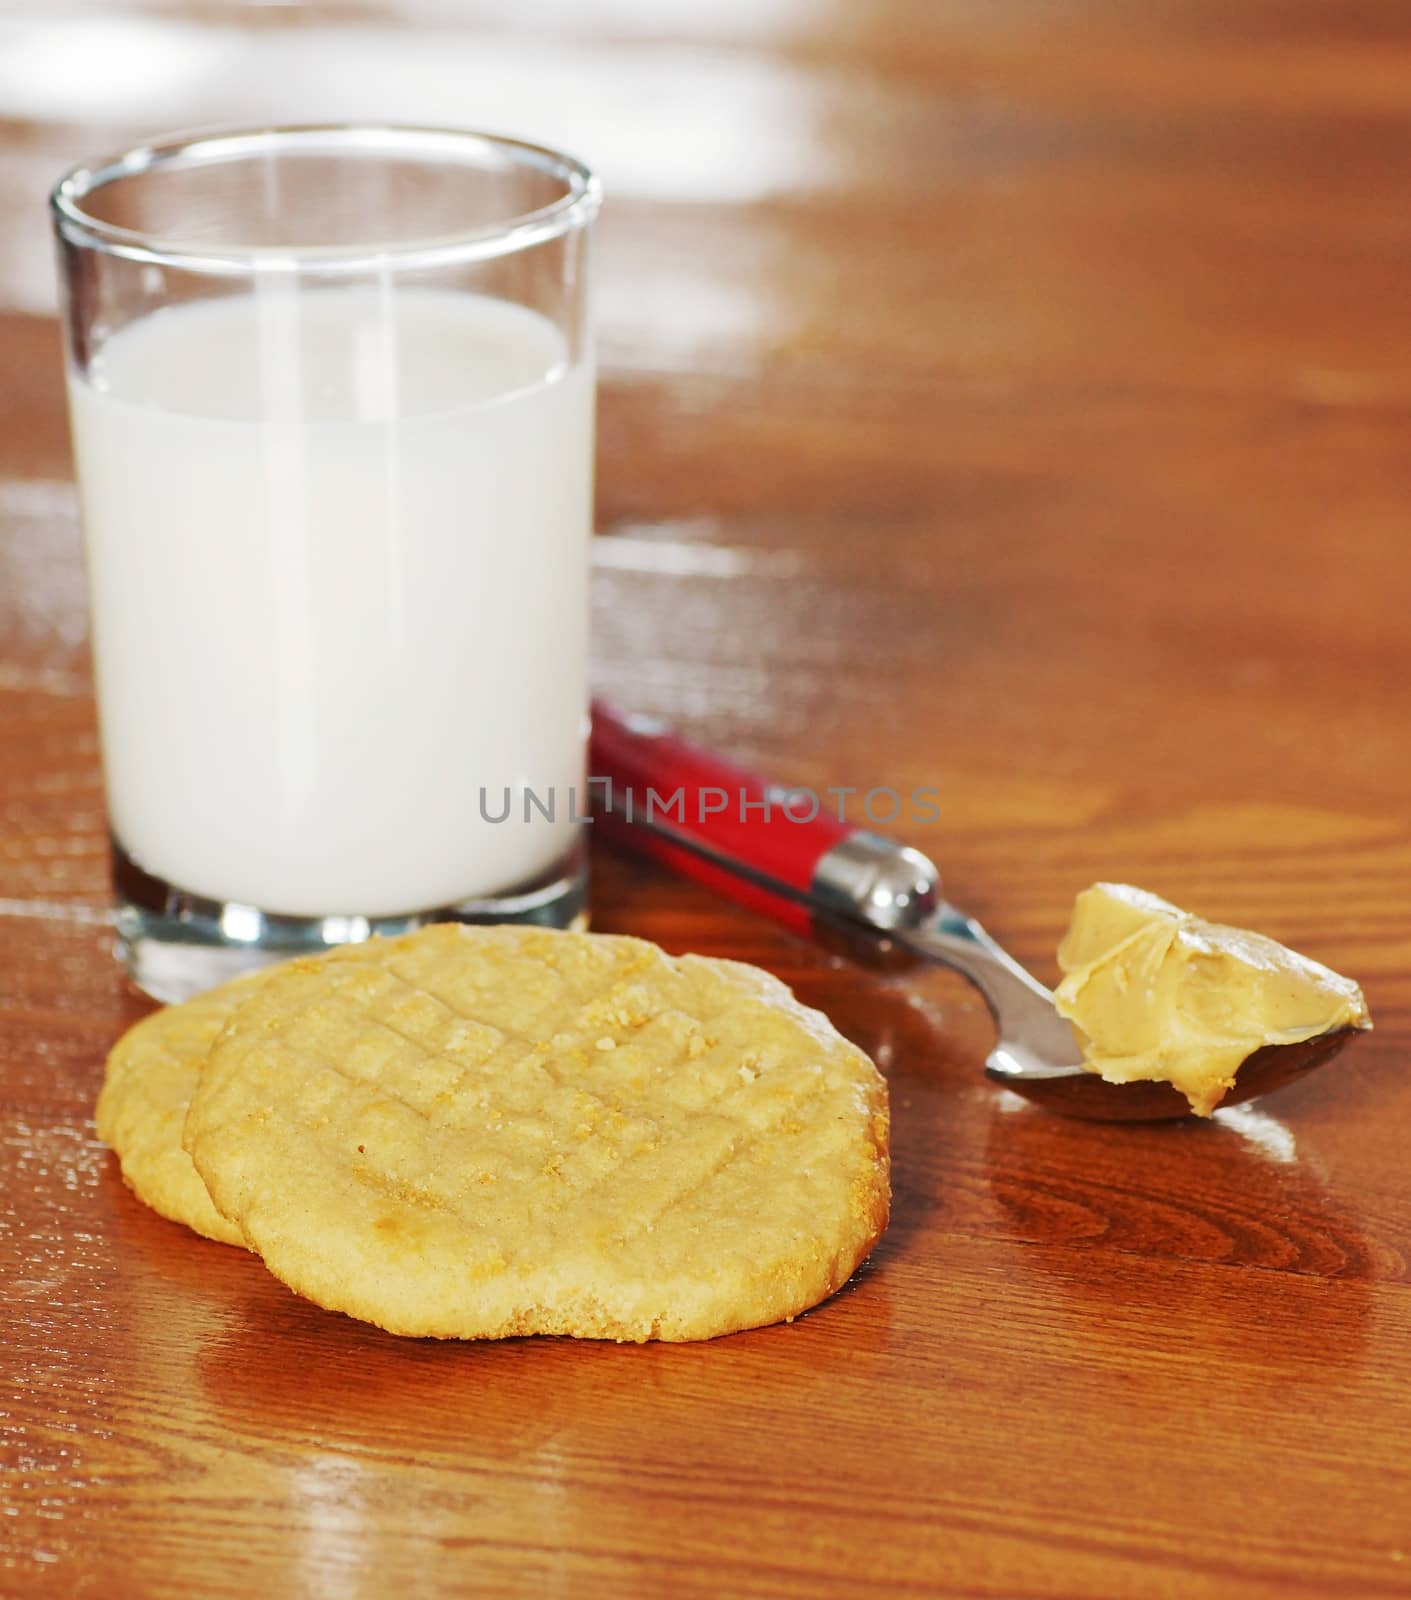 Homemade peanut butter cookies with milk and spoon over wooden table.